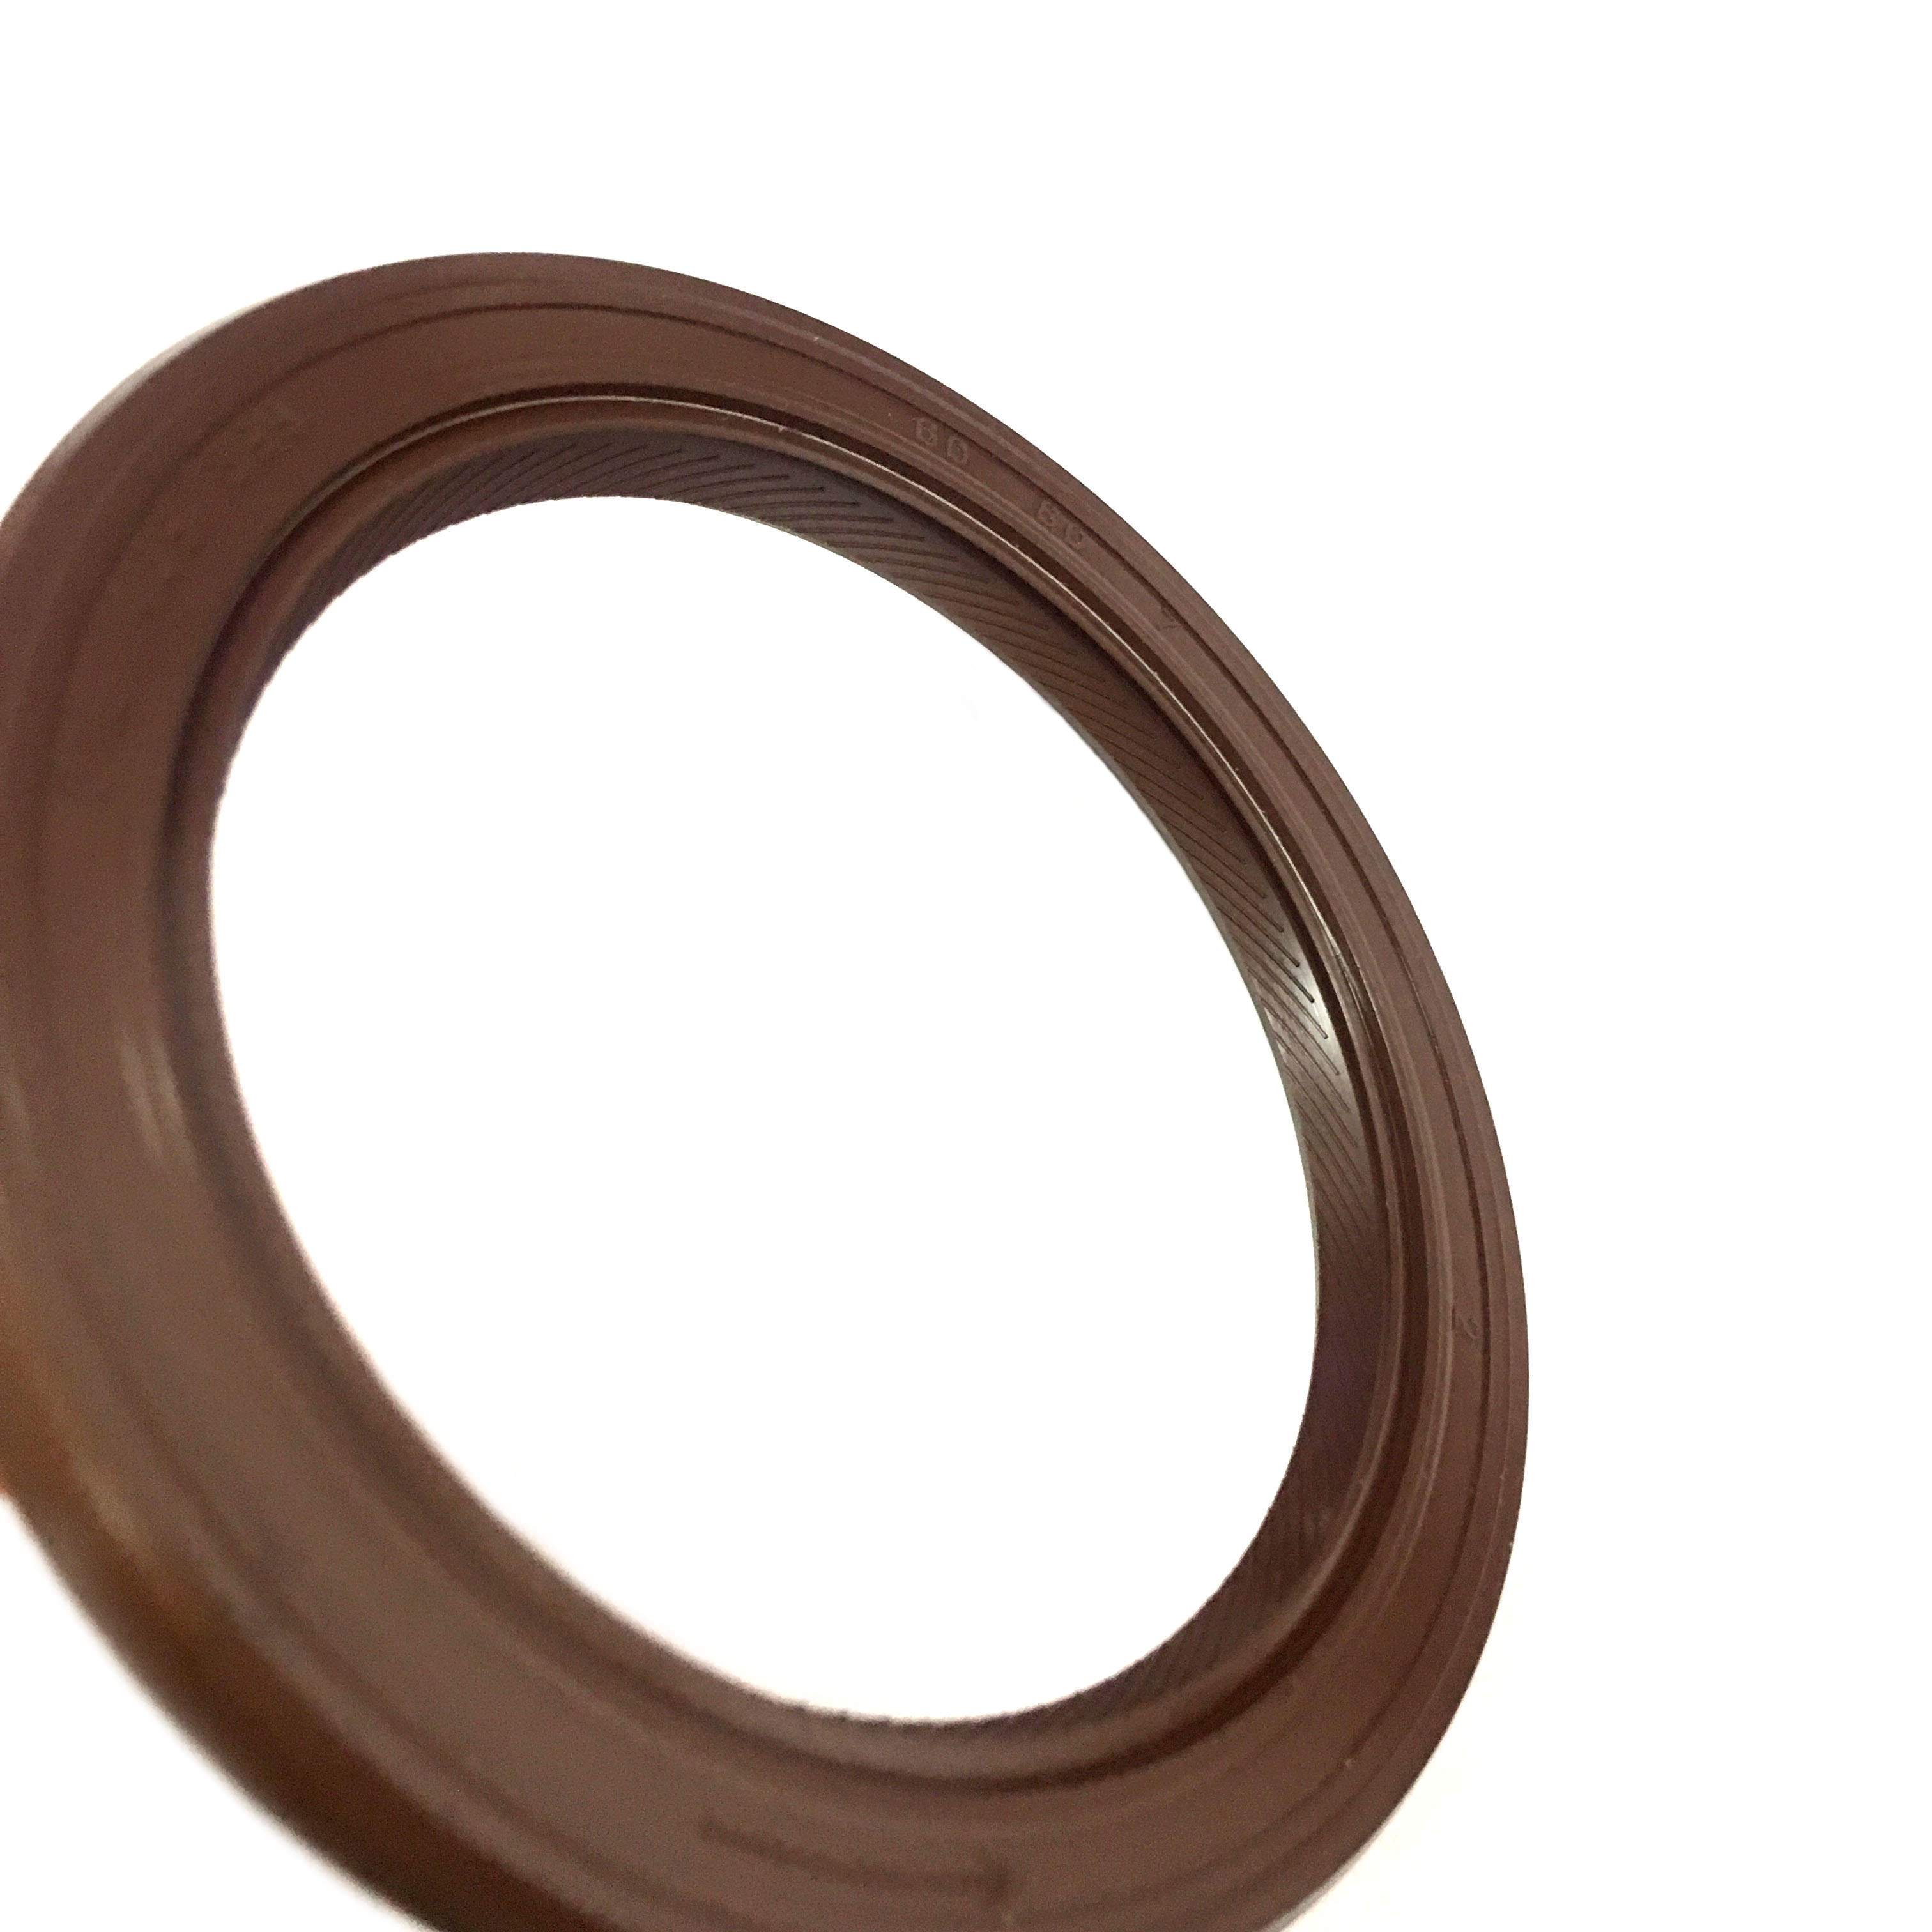 Transmission Shaft Oil Seal For Trans Model ZF5HP-19 Auto Parts OE 01L409399 Size 60*80*7